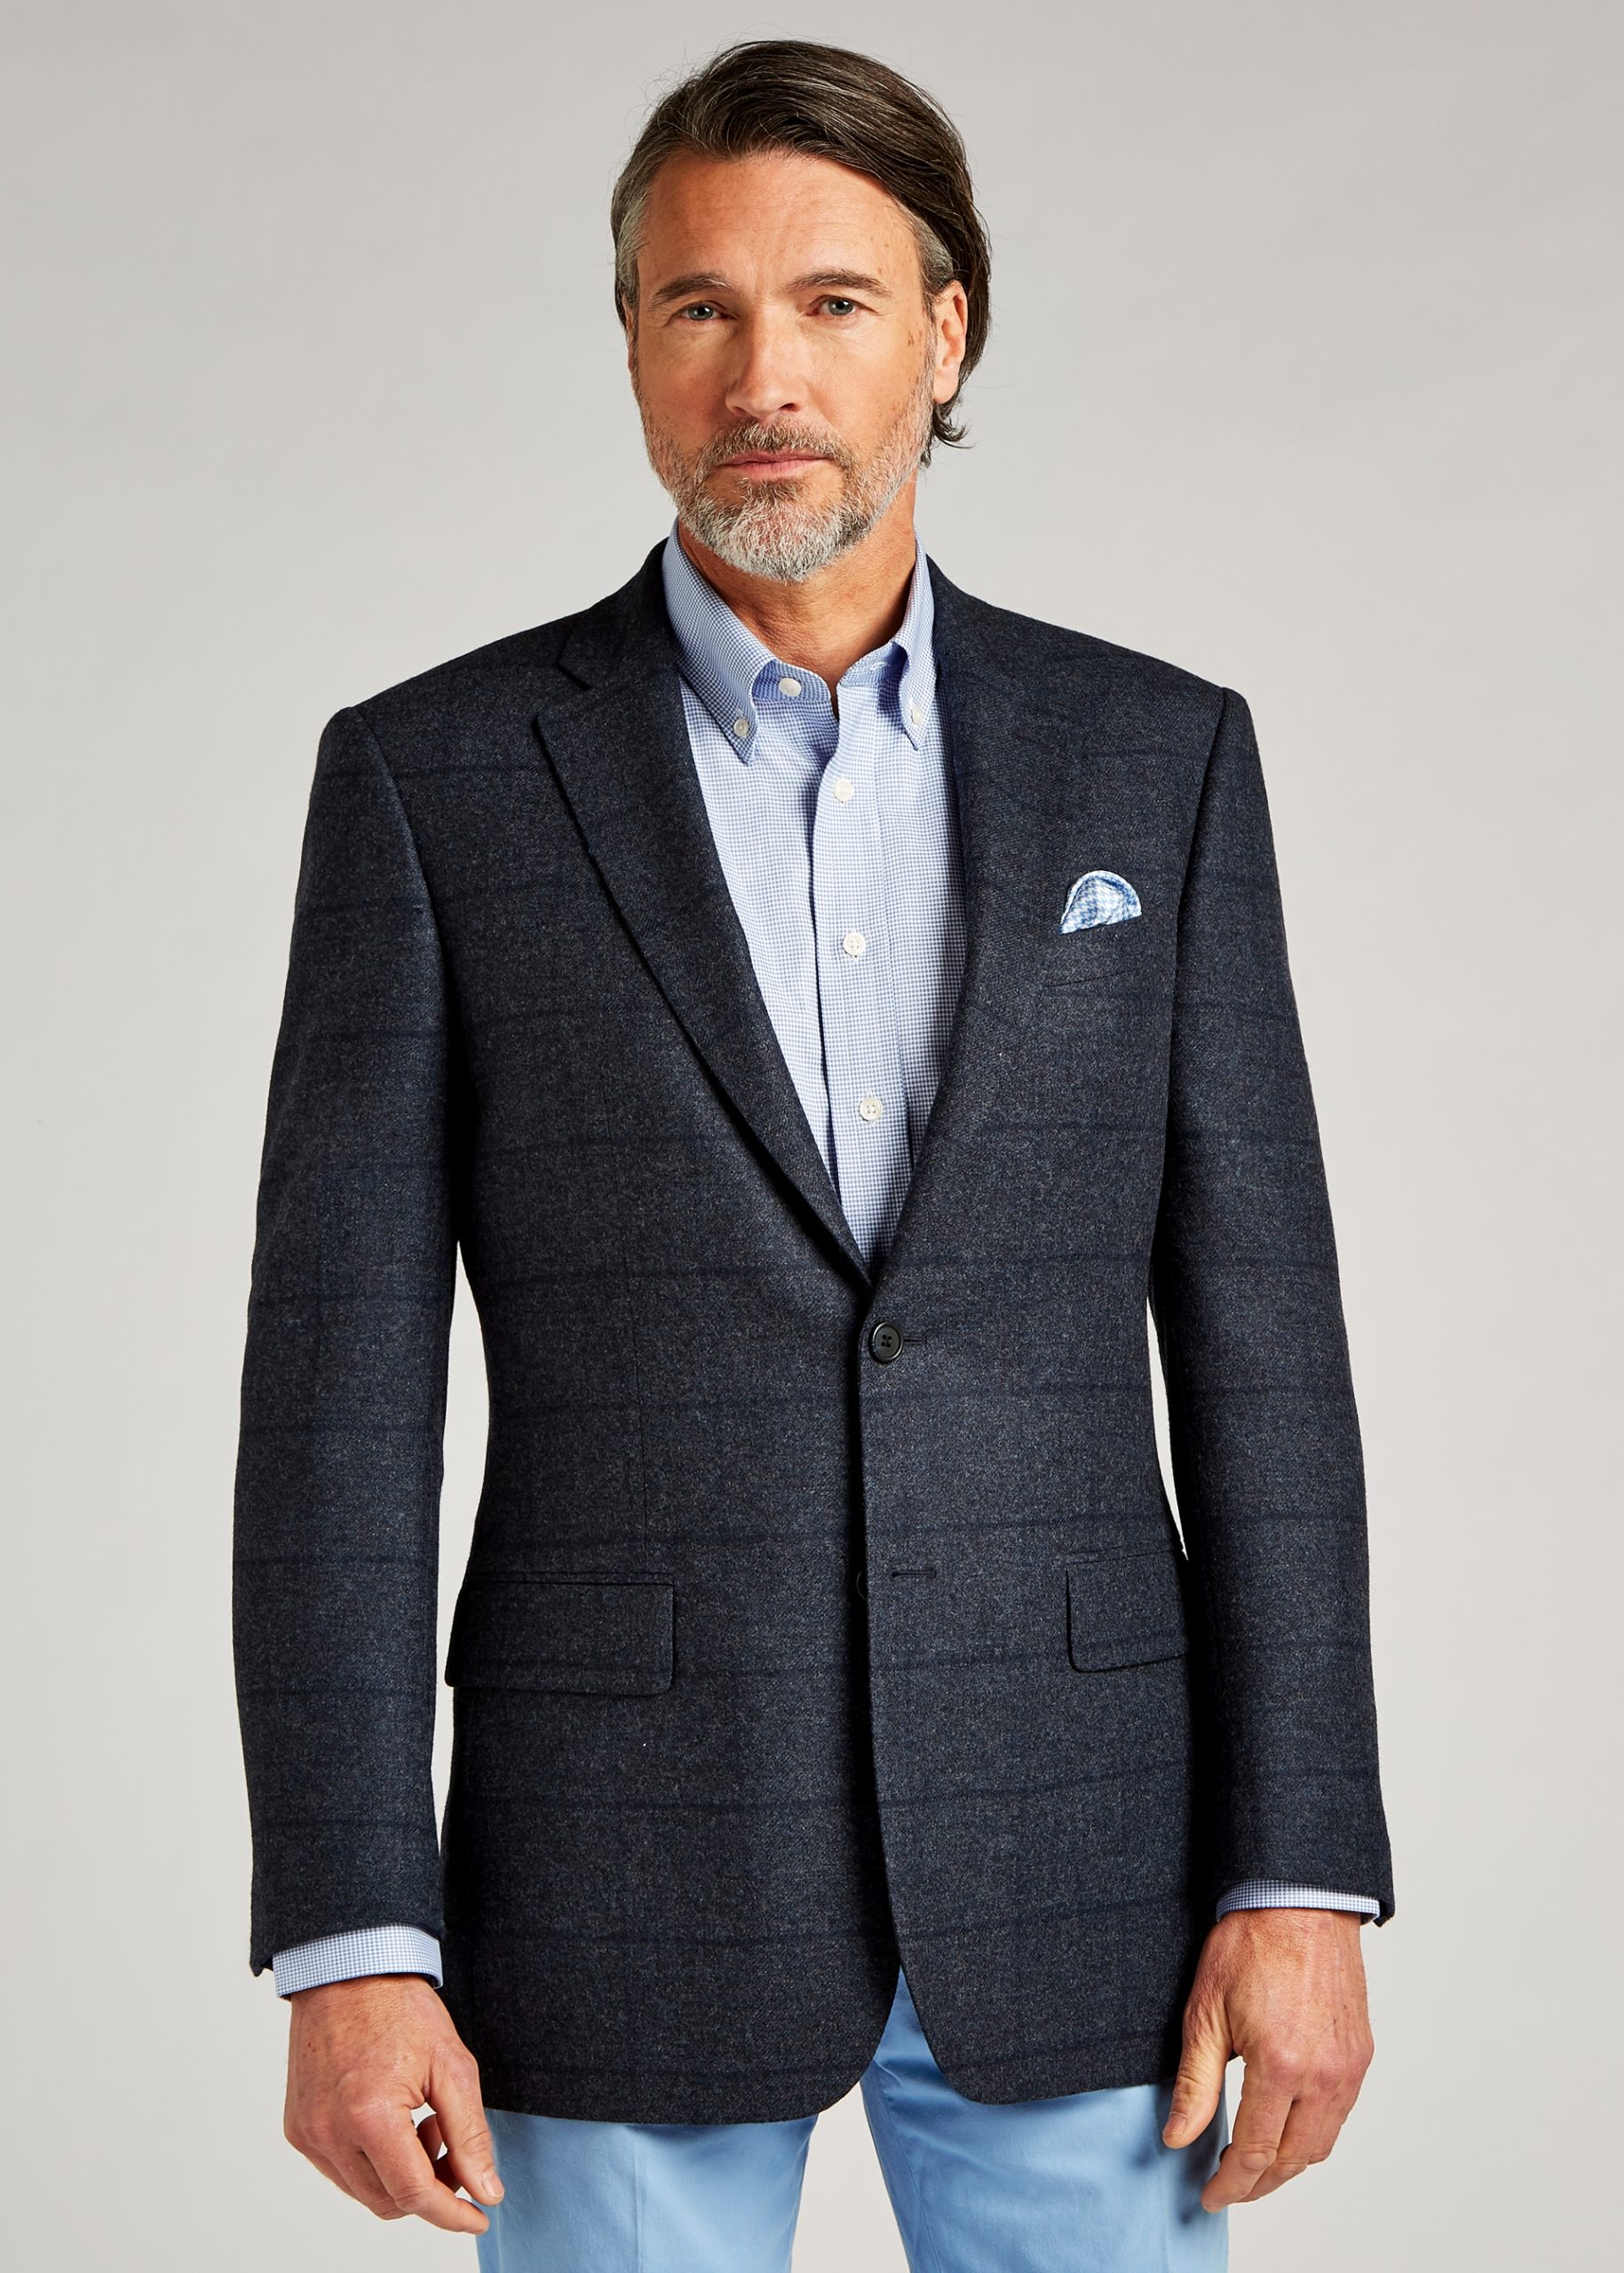 Roderick Charles tailored fit navy blue tweed jacket styled with pale blue silk pocket square